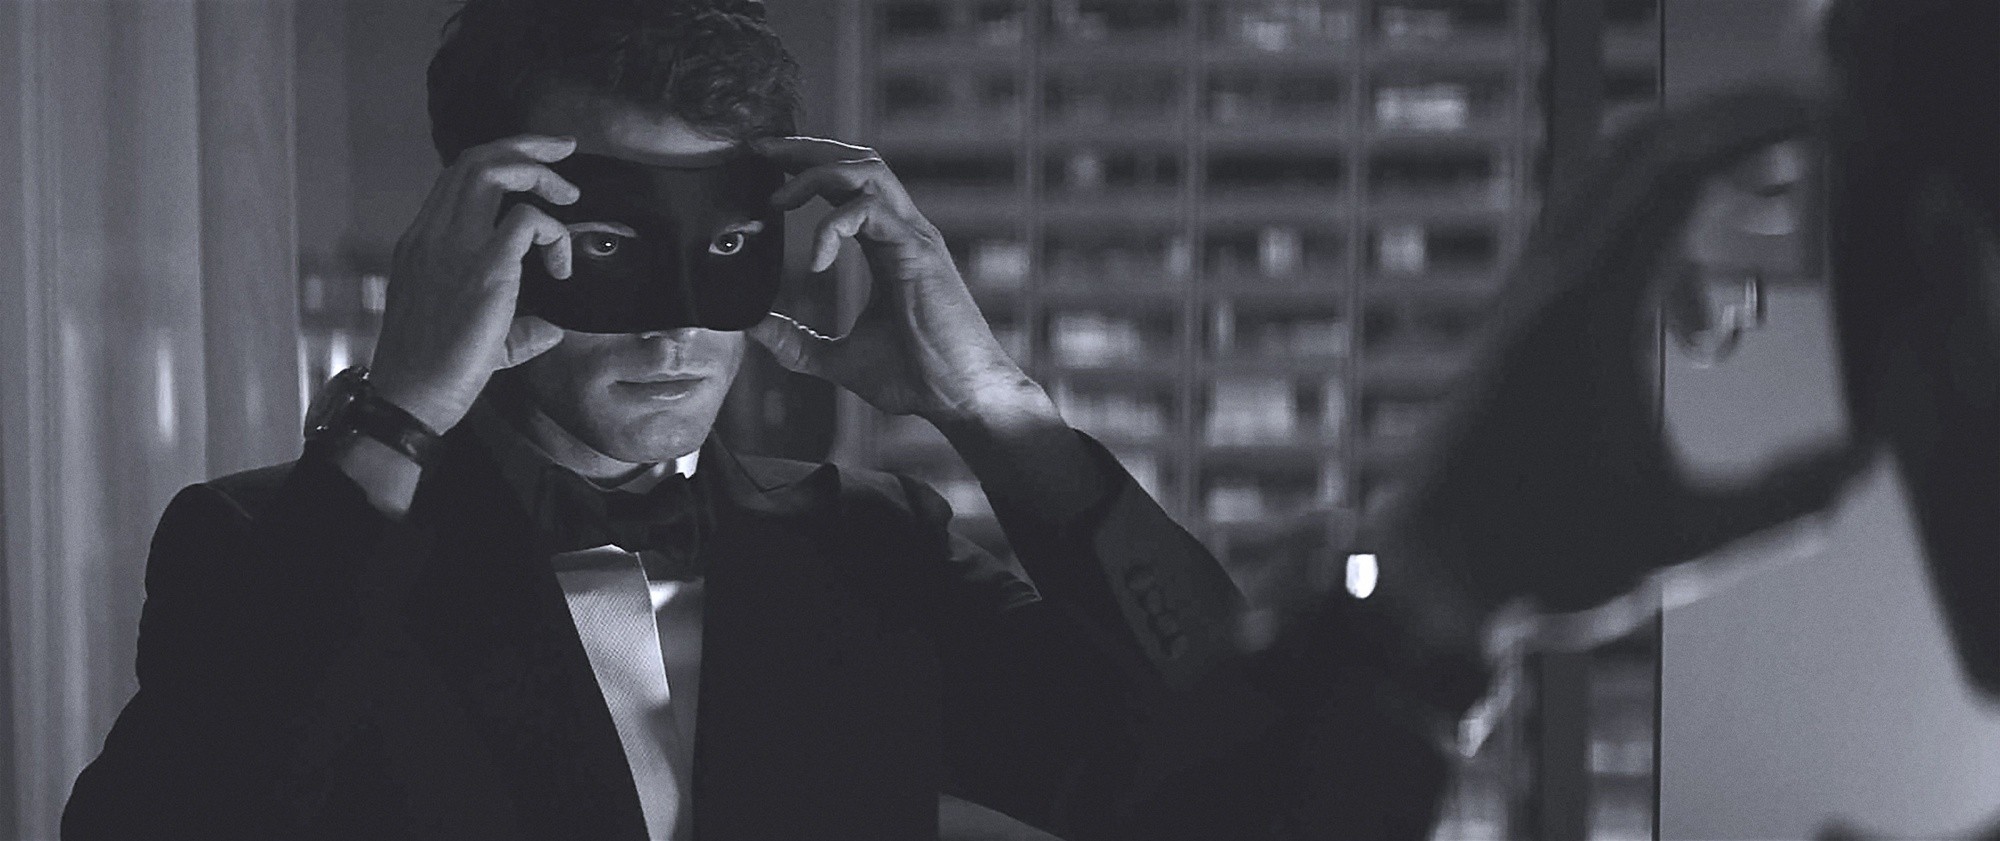 Jamie Dornan stars as Christian Grey in Universal Pictures' Fifty Shades Darker (2017)